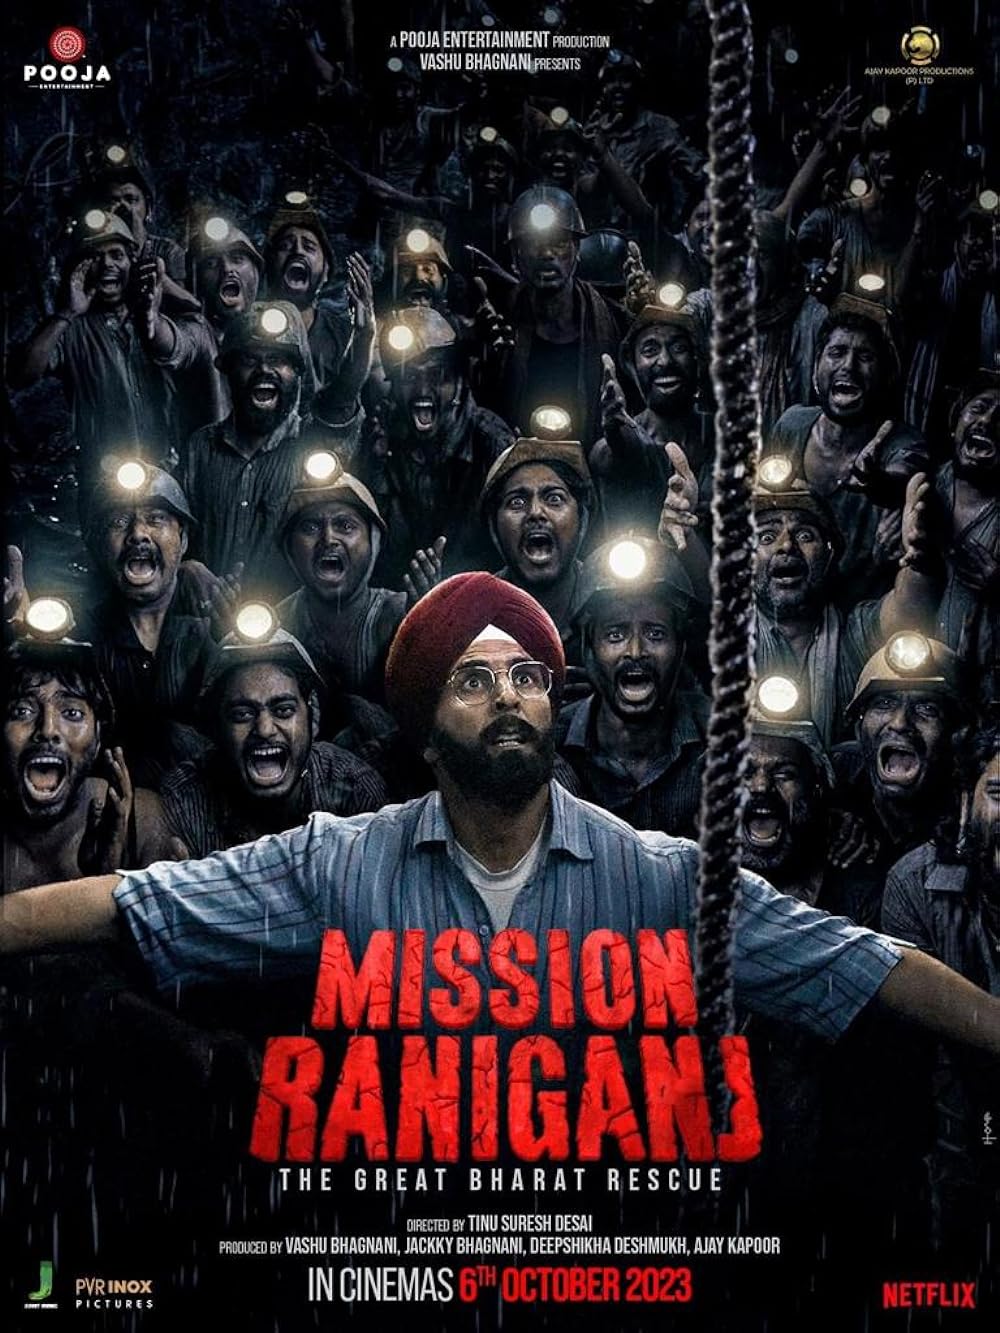 Mission Raniganj - 6 October
'Mission Raniganj' takes us back in time to a remarkable rescue operation where 65 miners were trapped underground. Mining engineer Jaswant Singh Gill becomes the beacon of hope in this desperate situation, leading a daring mission to save lives. This gripping story of courage, determination, and human resilience is a testament to the indomitable spirit of those who rise to the occasion in times of crisis.